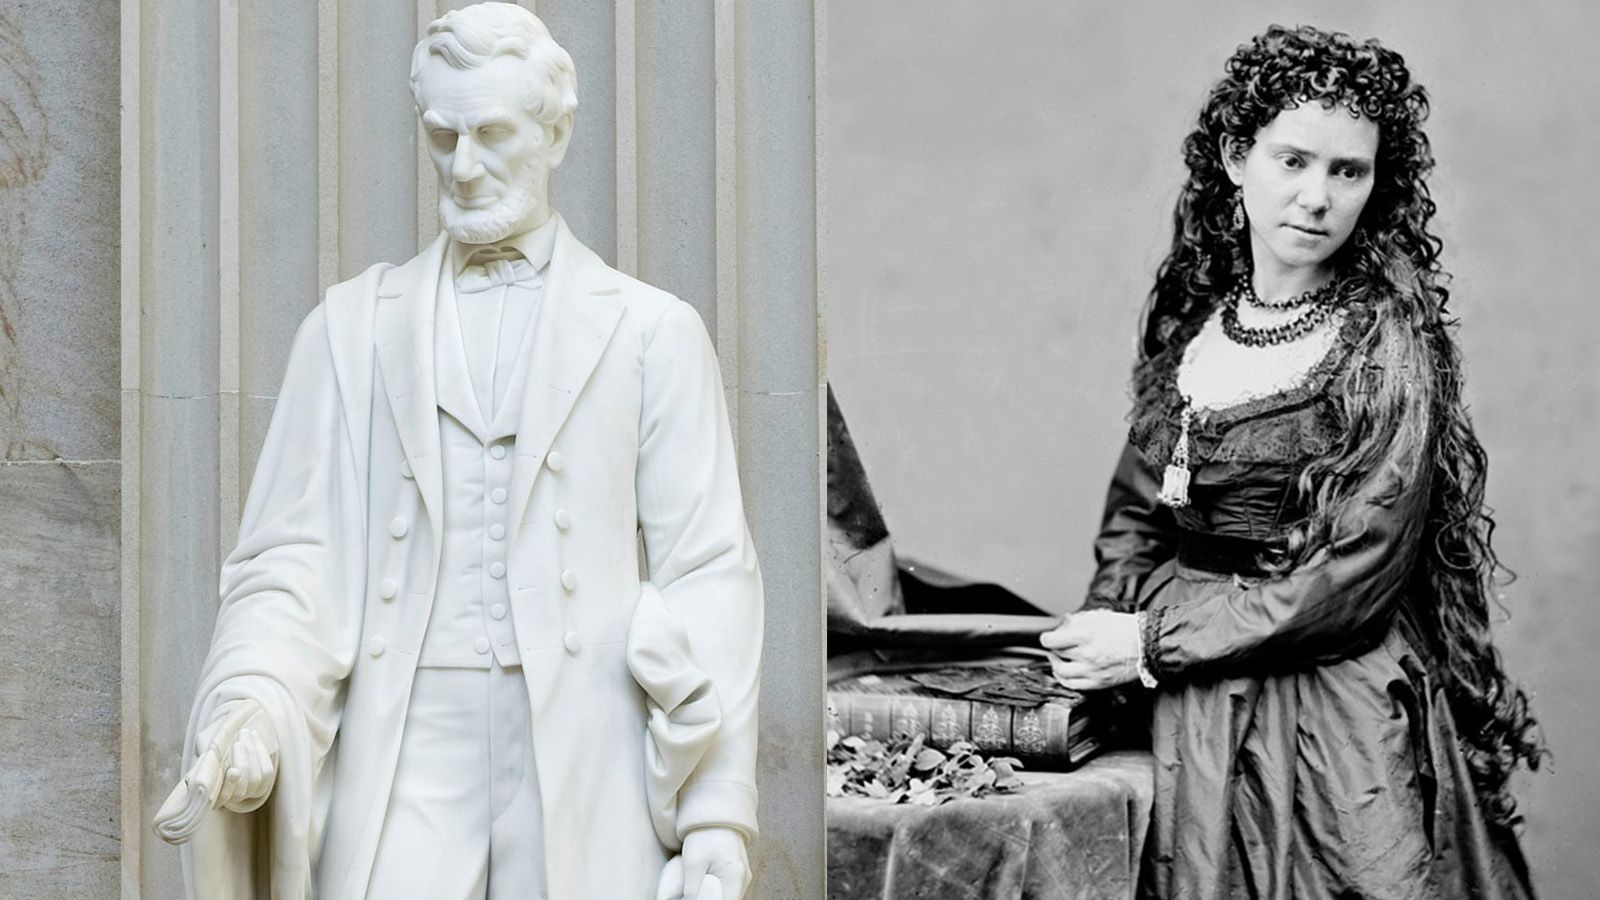 Sculptor Vinnie Ream, right, and her statue of Lincoln that stands in the U.S. Capitol.